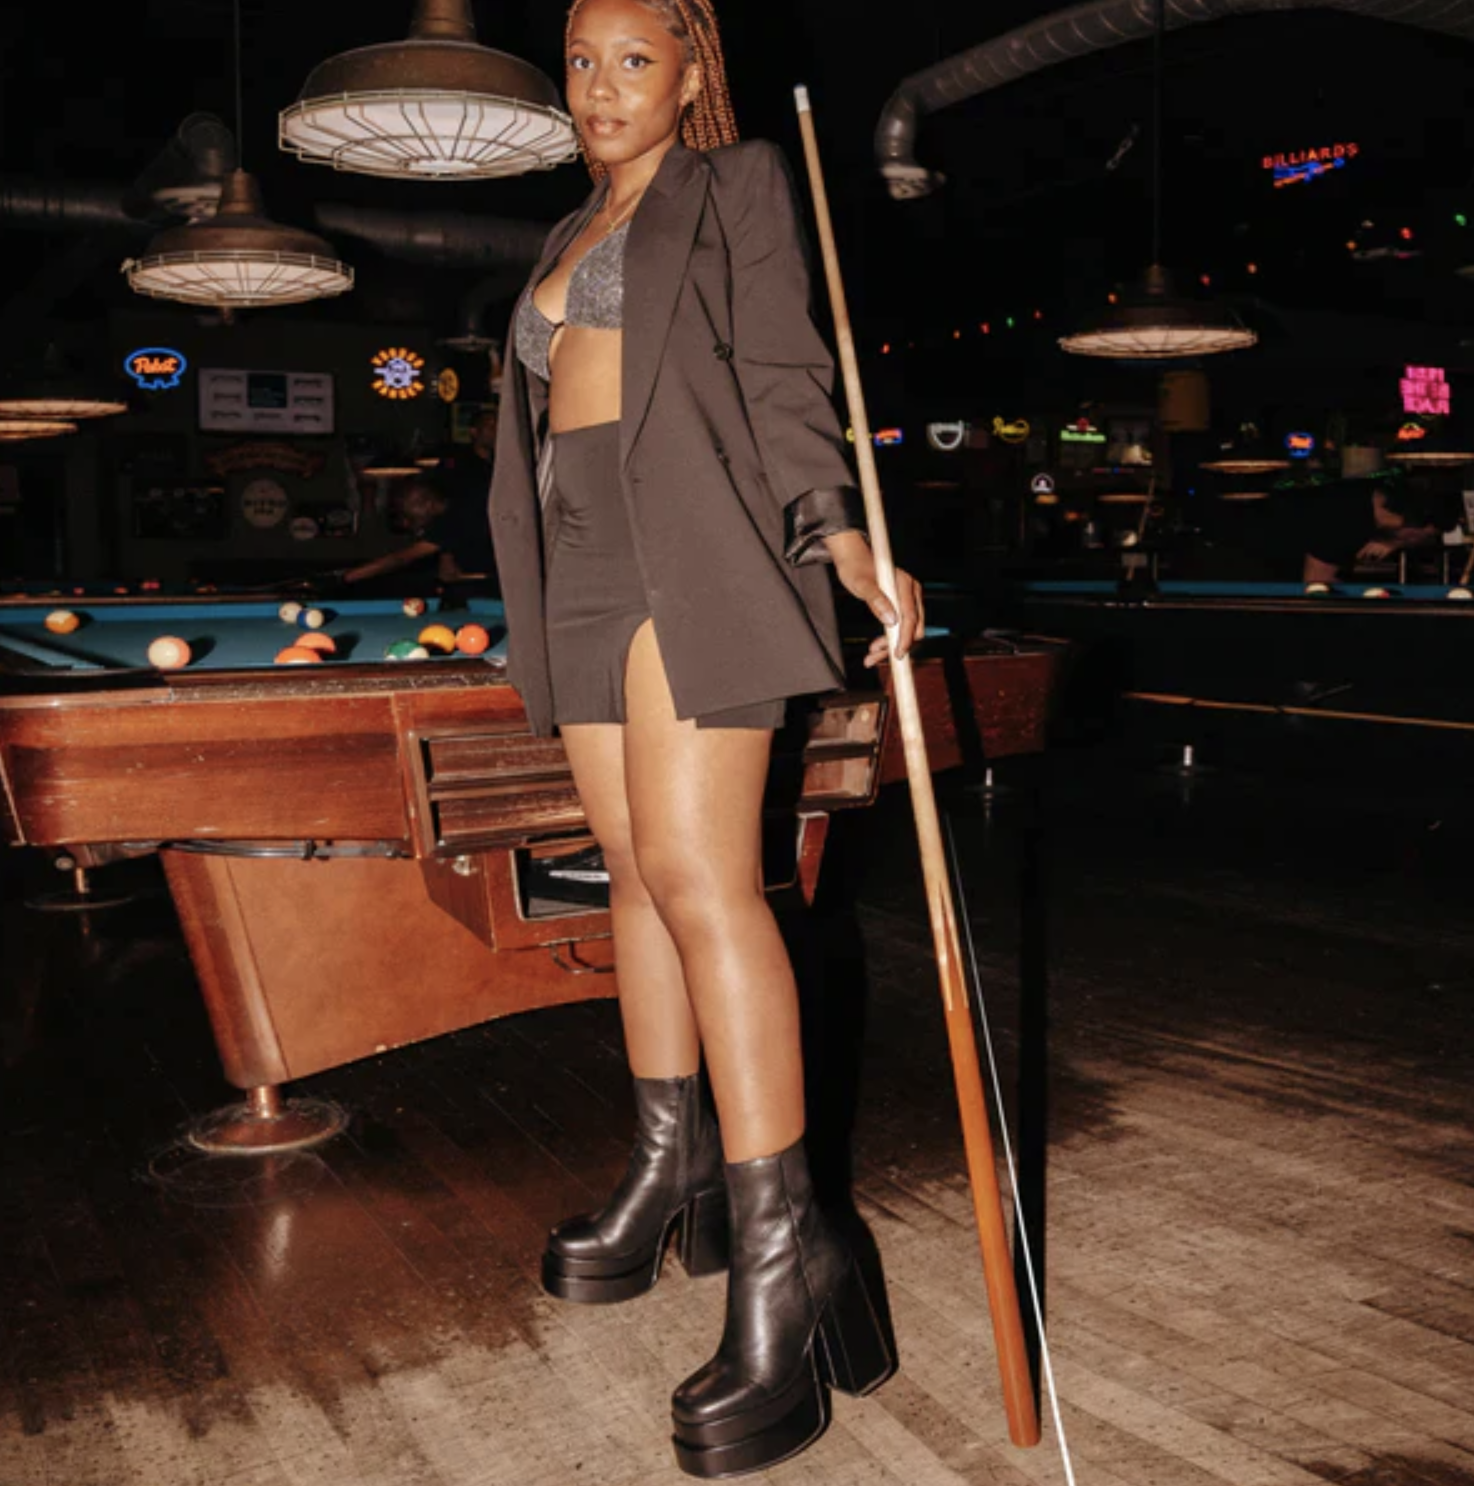 A person wearing the boots with a blazer, top, and skirt while standing at a pool table with a pool cue